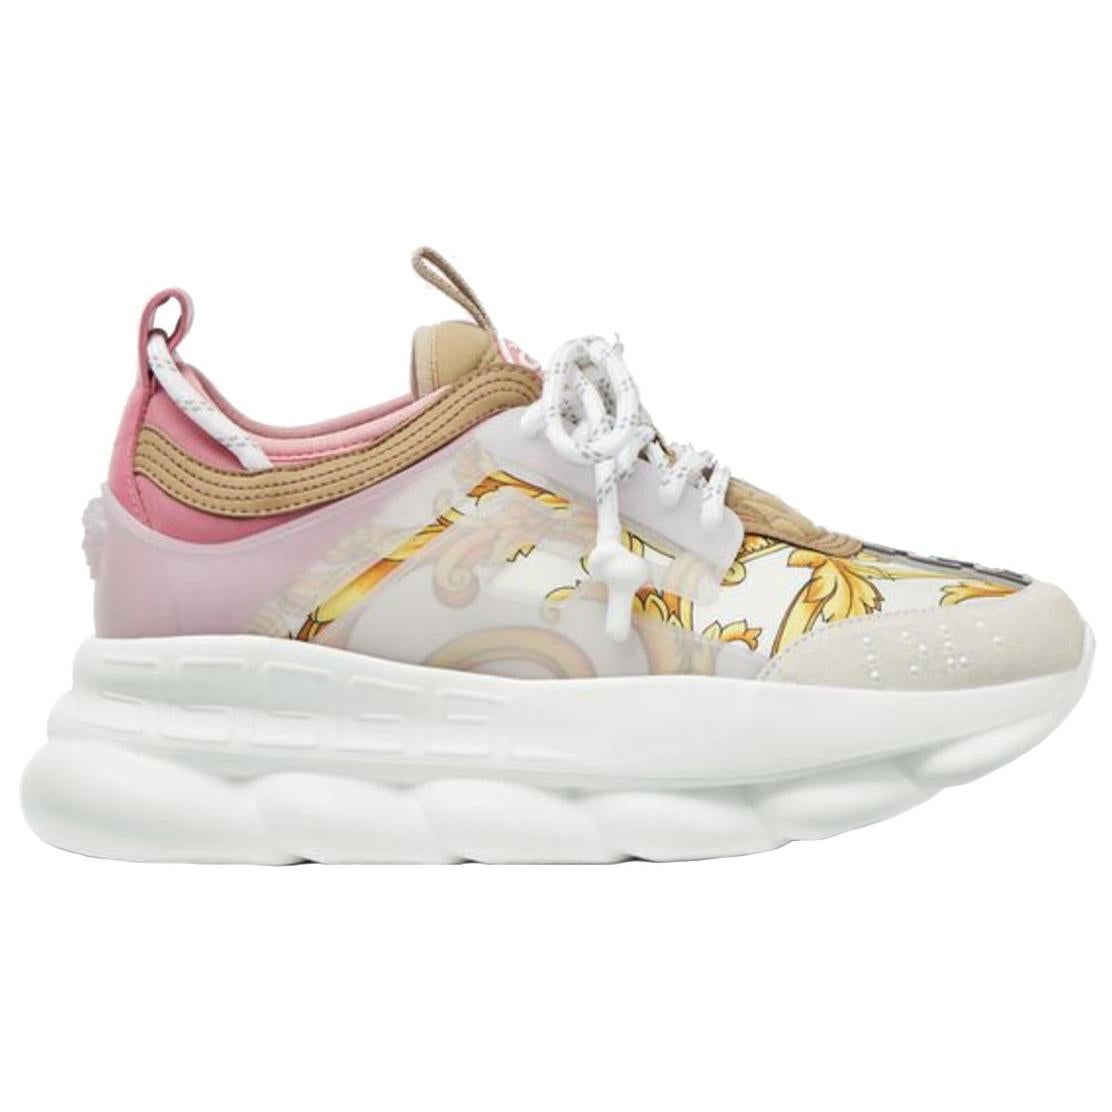 Versace Floral Chain Reaction Sneakers in Pink for Men